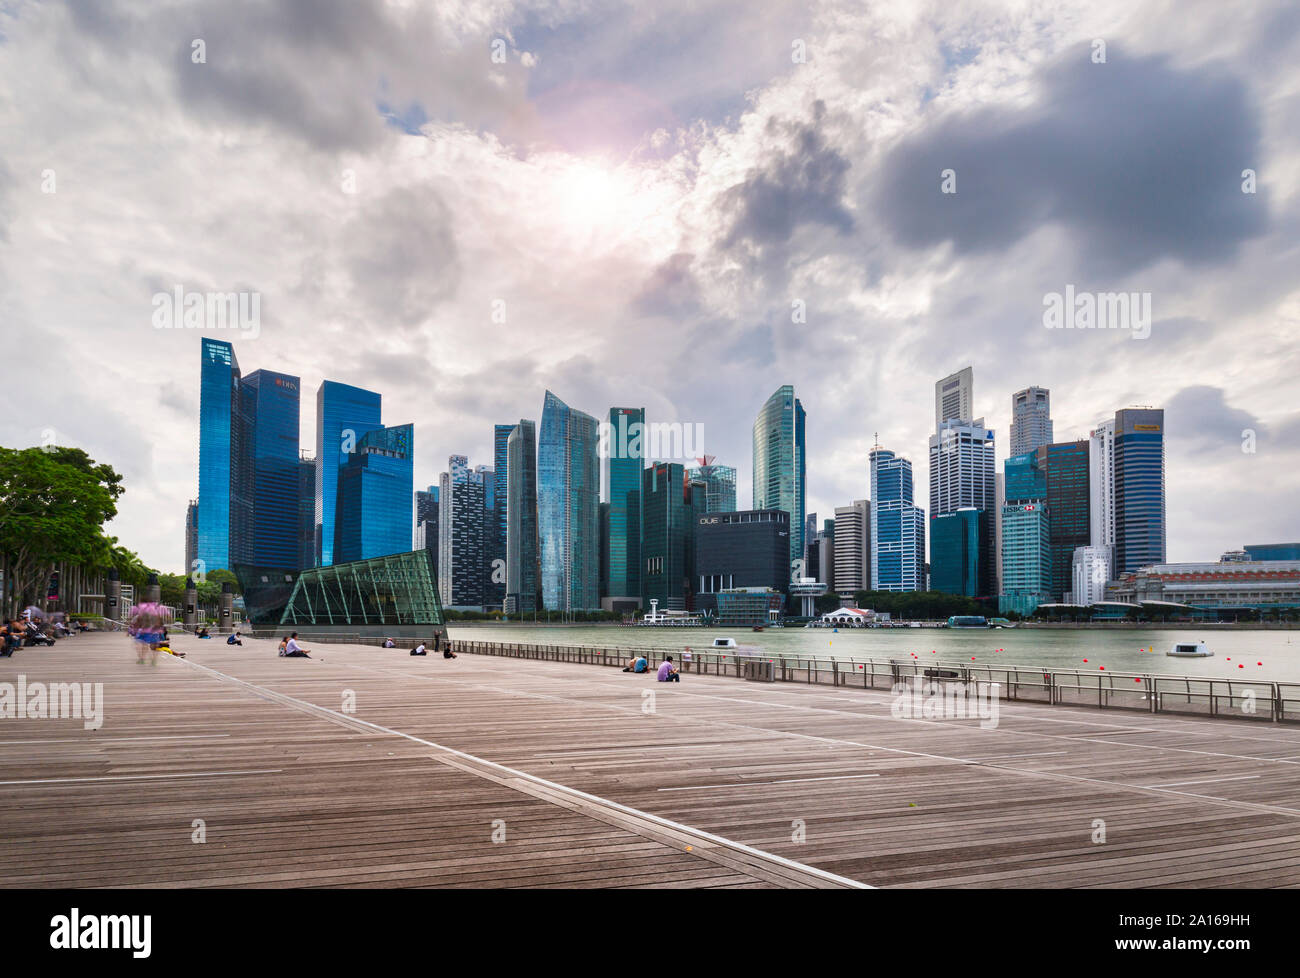 Skyline of Financial District and Marina Bay, Singapore Stock Photo